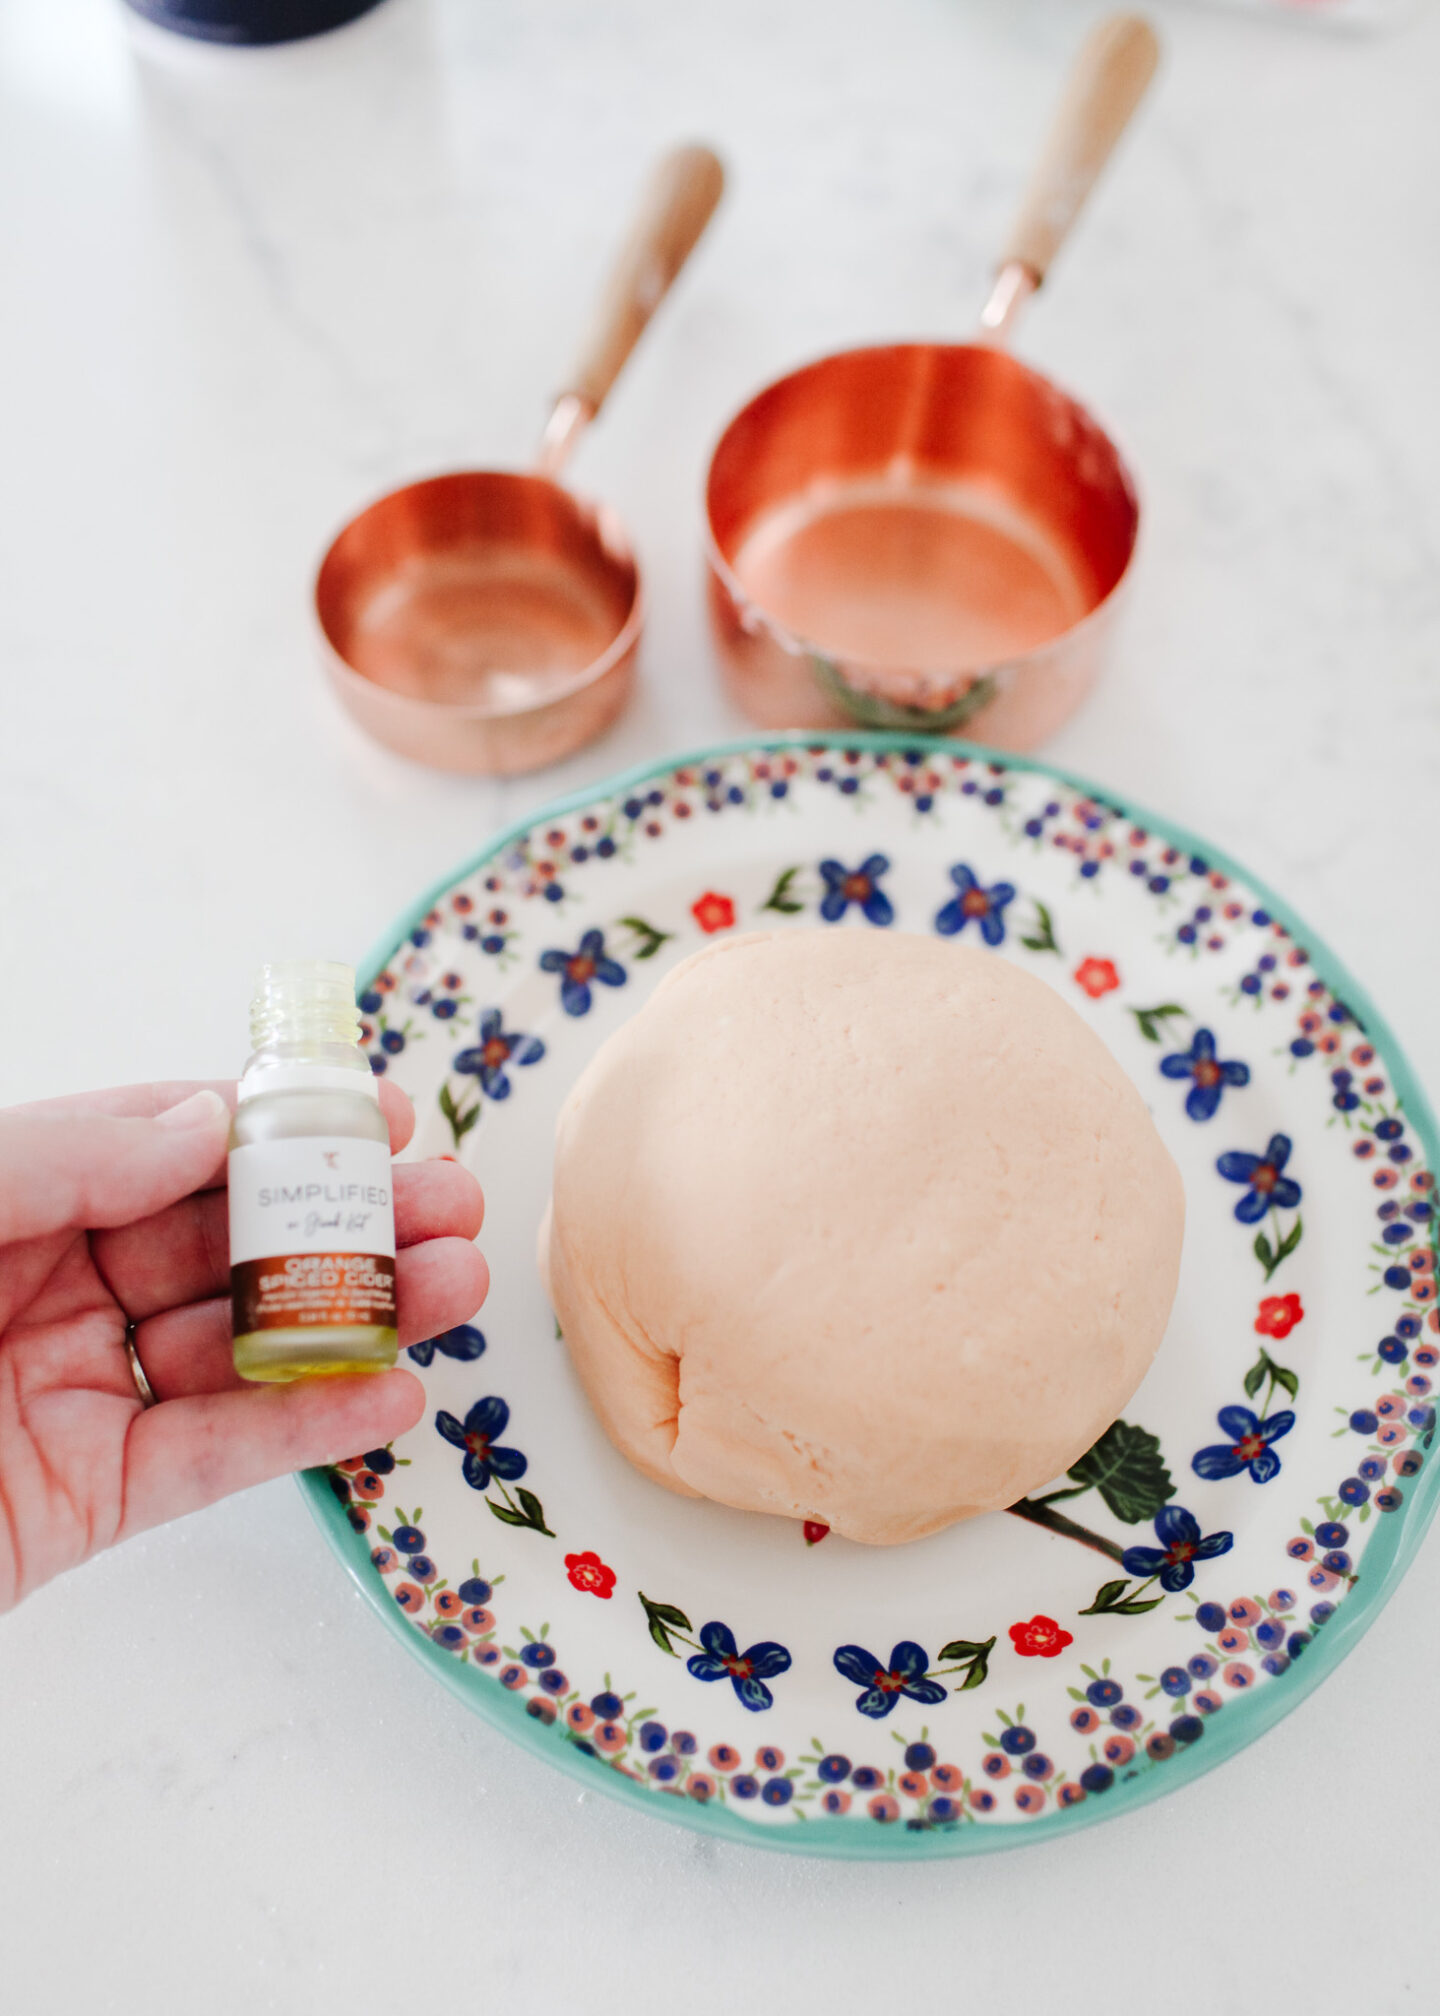 Homemade orange playdough on plate with essential oil